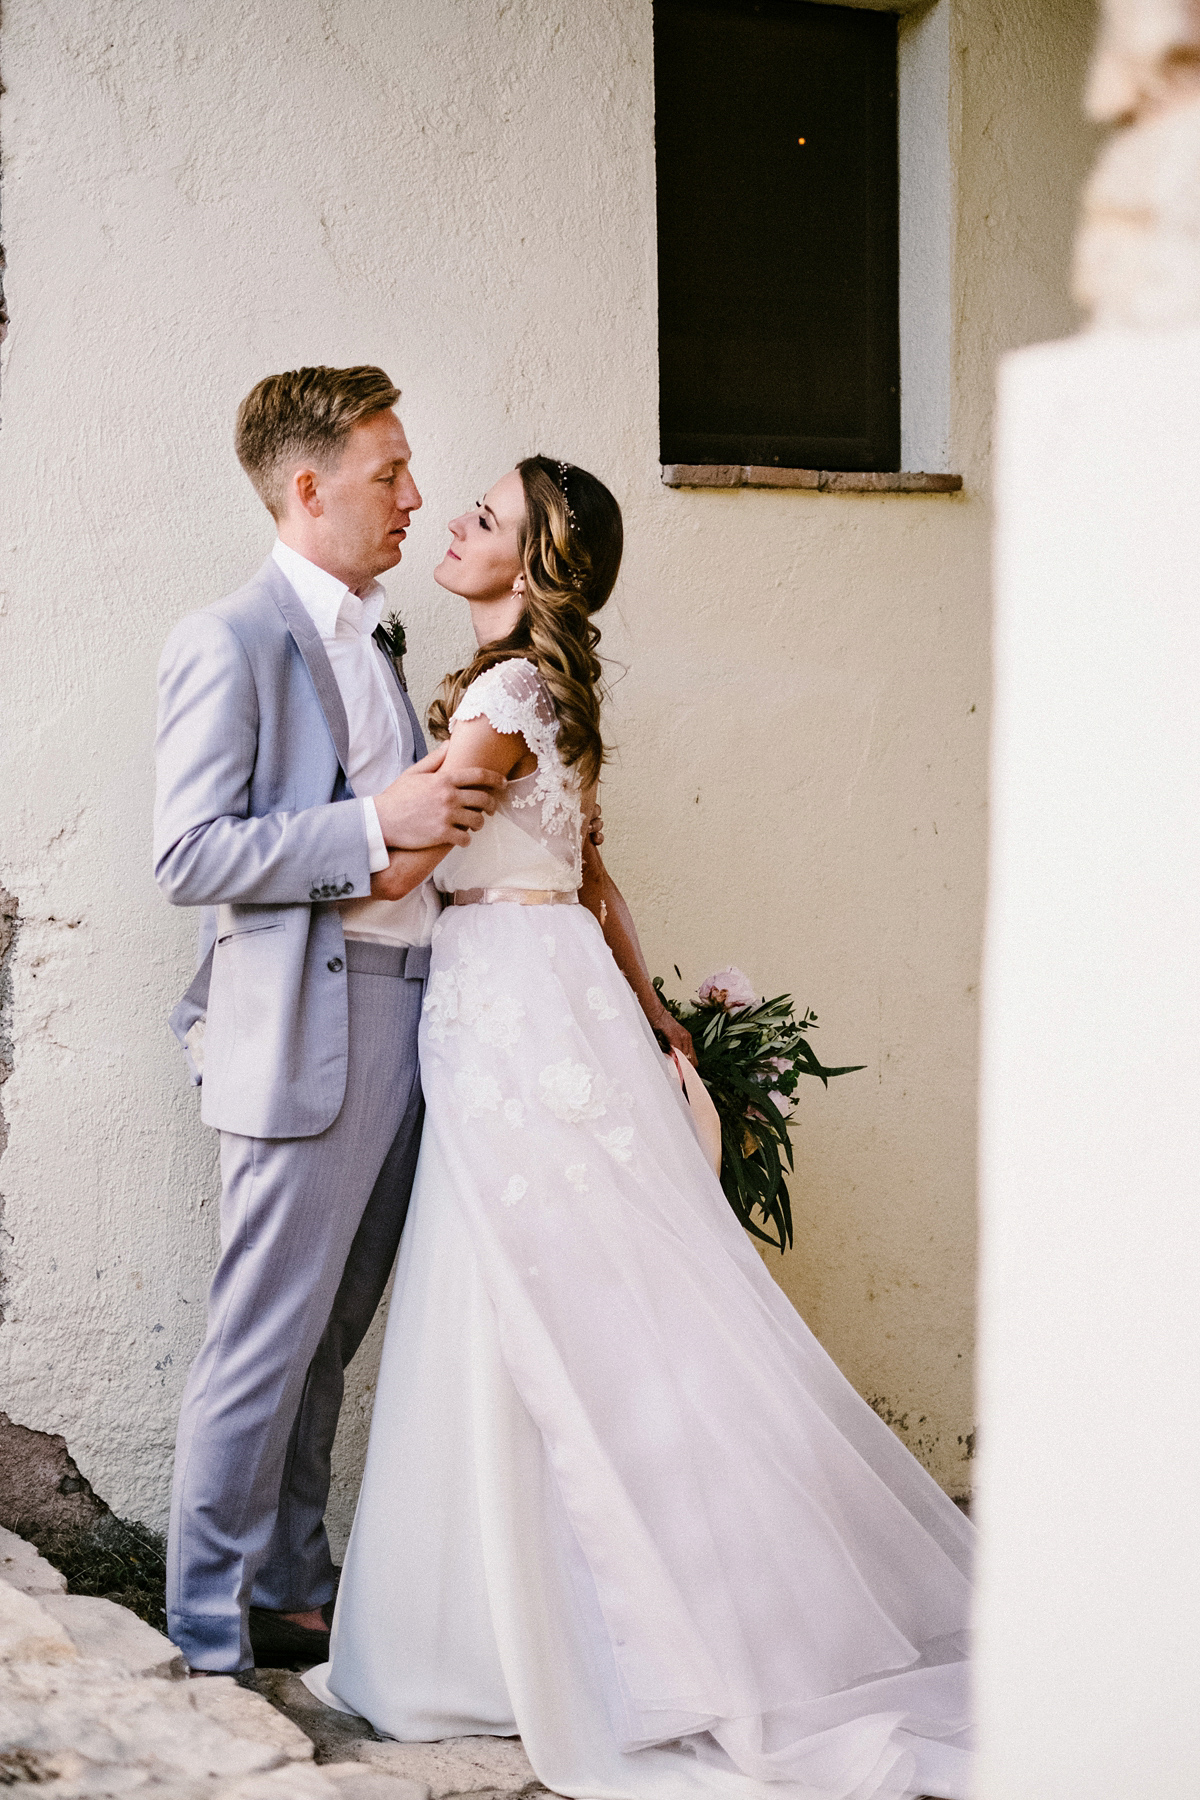 Bride Laura wears a bespoke wedding dress by Wilden Bride for her elegant destination wedding in Spain. Photography by Claudia Rose Carter.